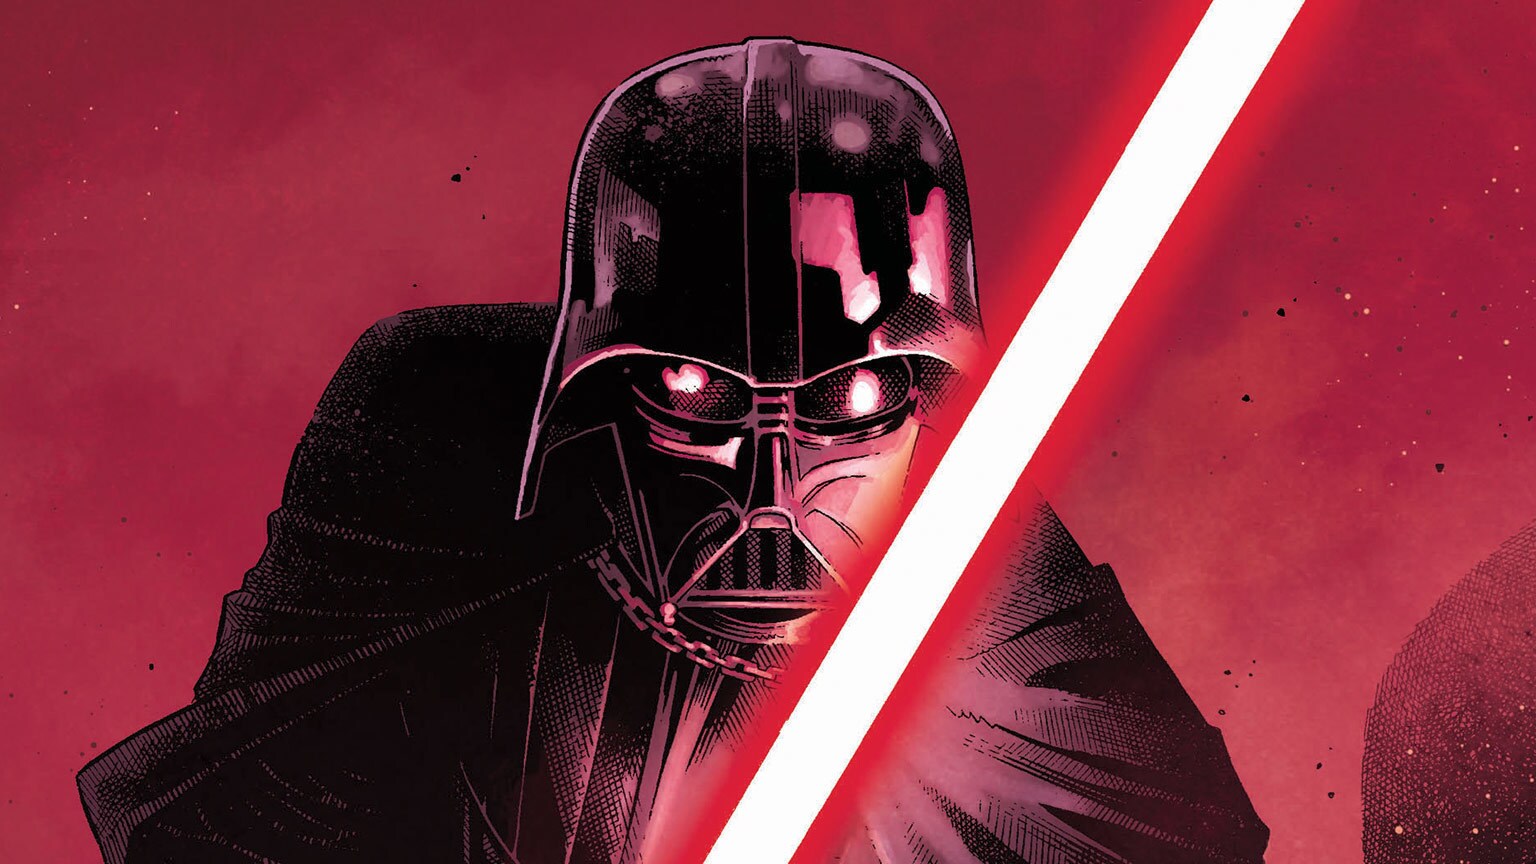 In Marvel's New Darth Vader Series, We Will See the Sith Lord's Rise, the Construction of His Lightsaber, and More